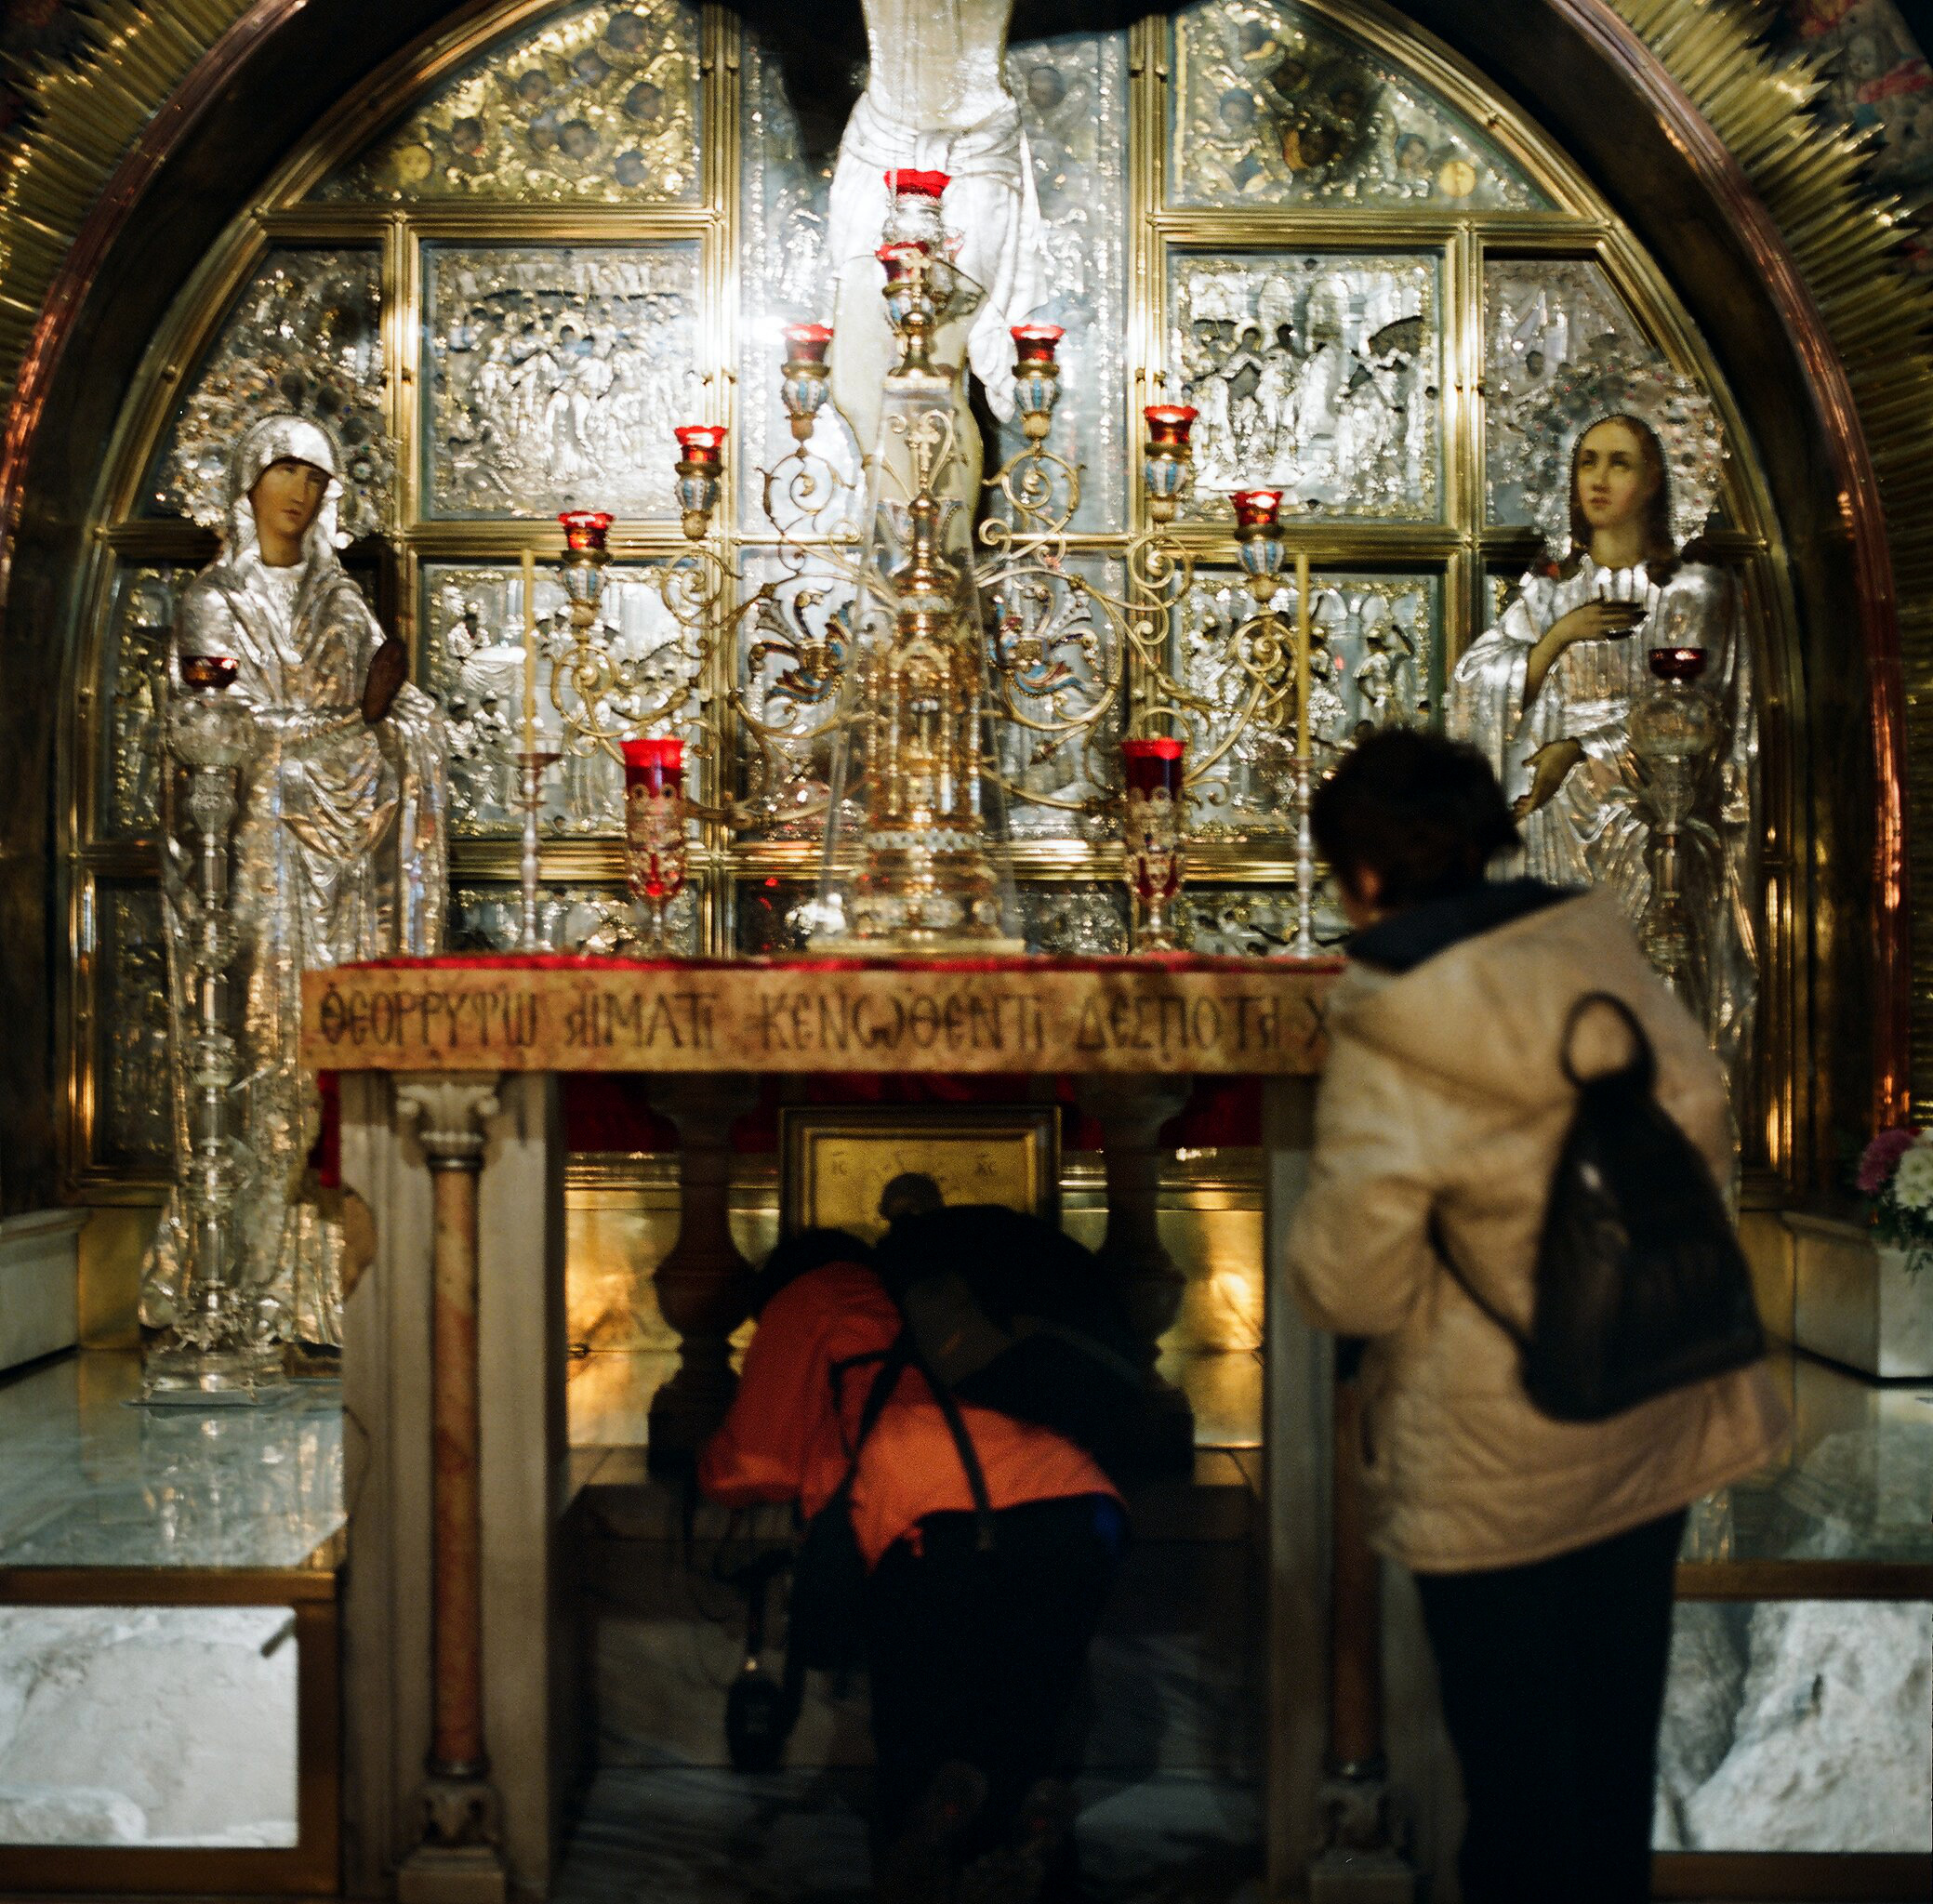 Golgota altar in the Church of the Holy Sepulchre, Jerusalem, Israel.